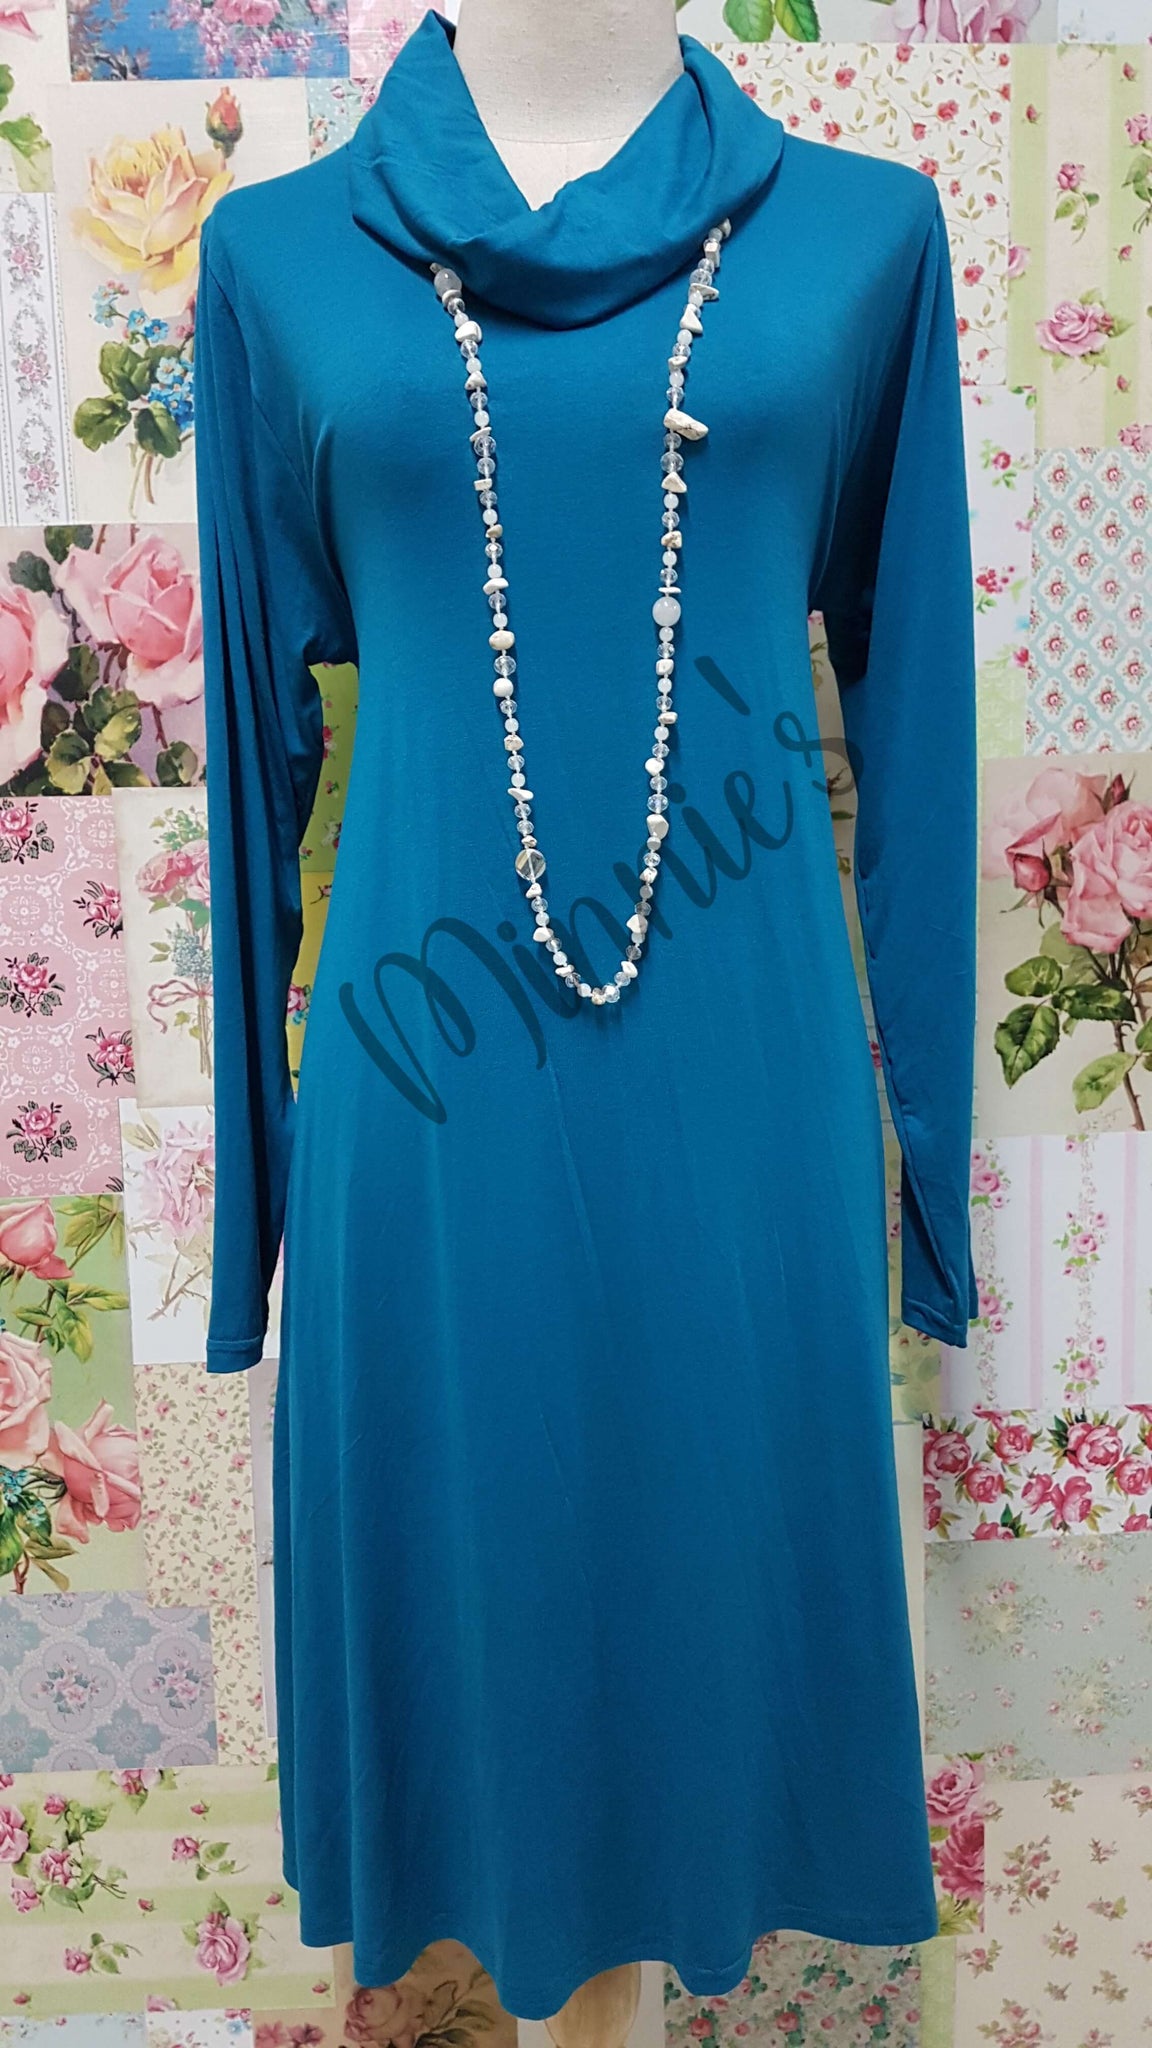 Teal Cowl Neck Top MD0203